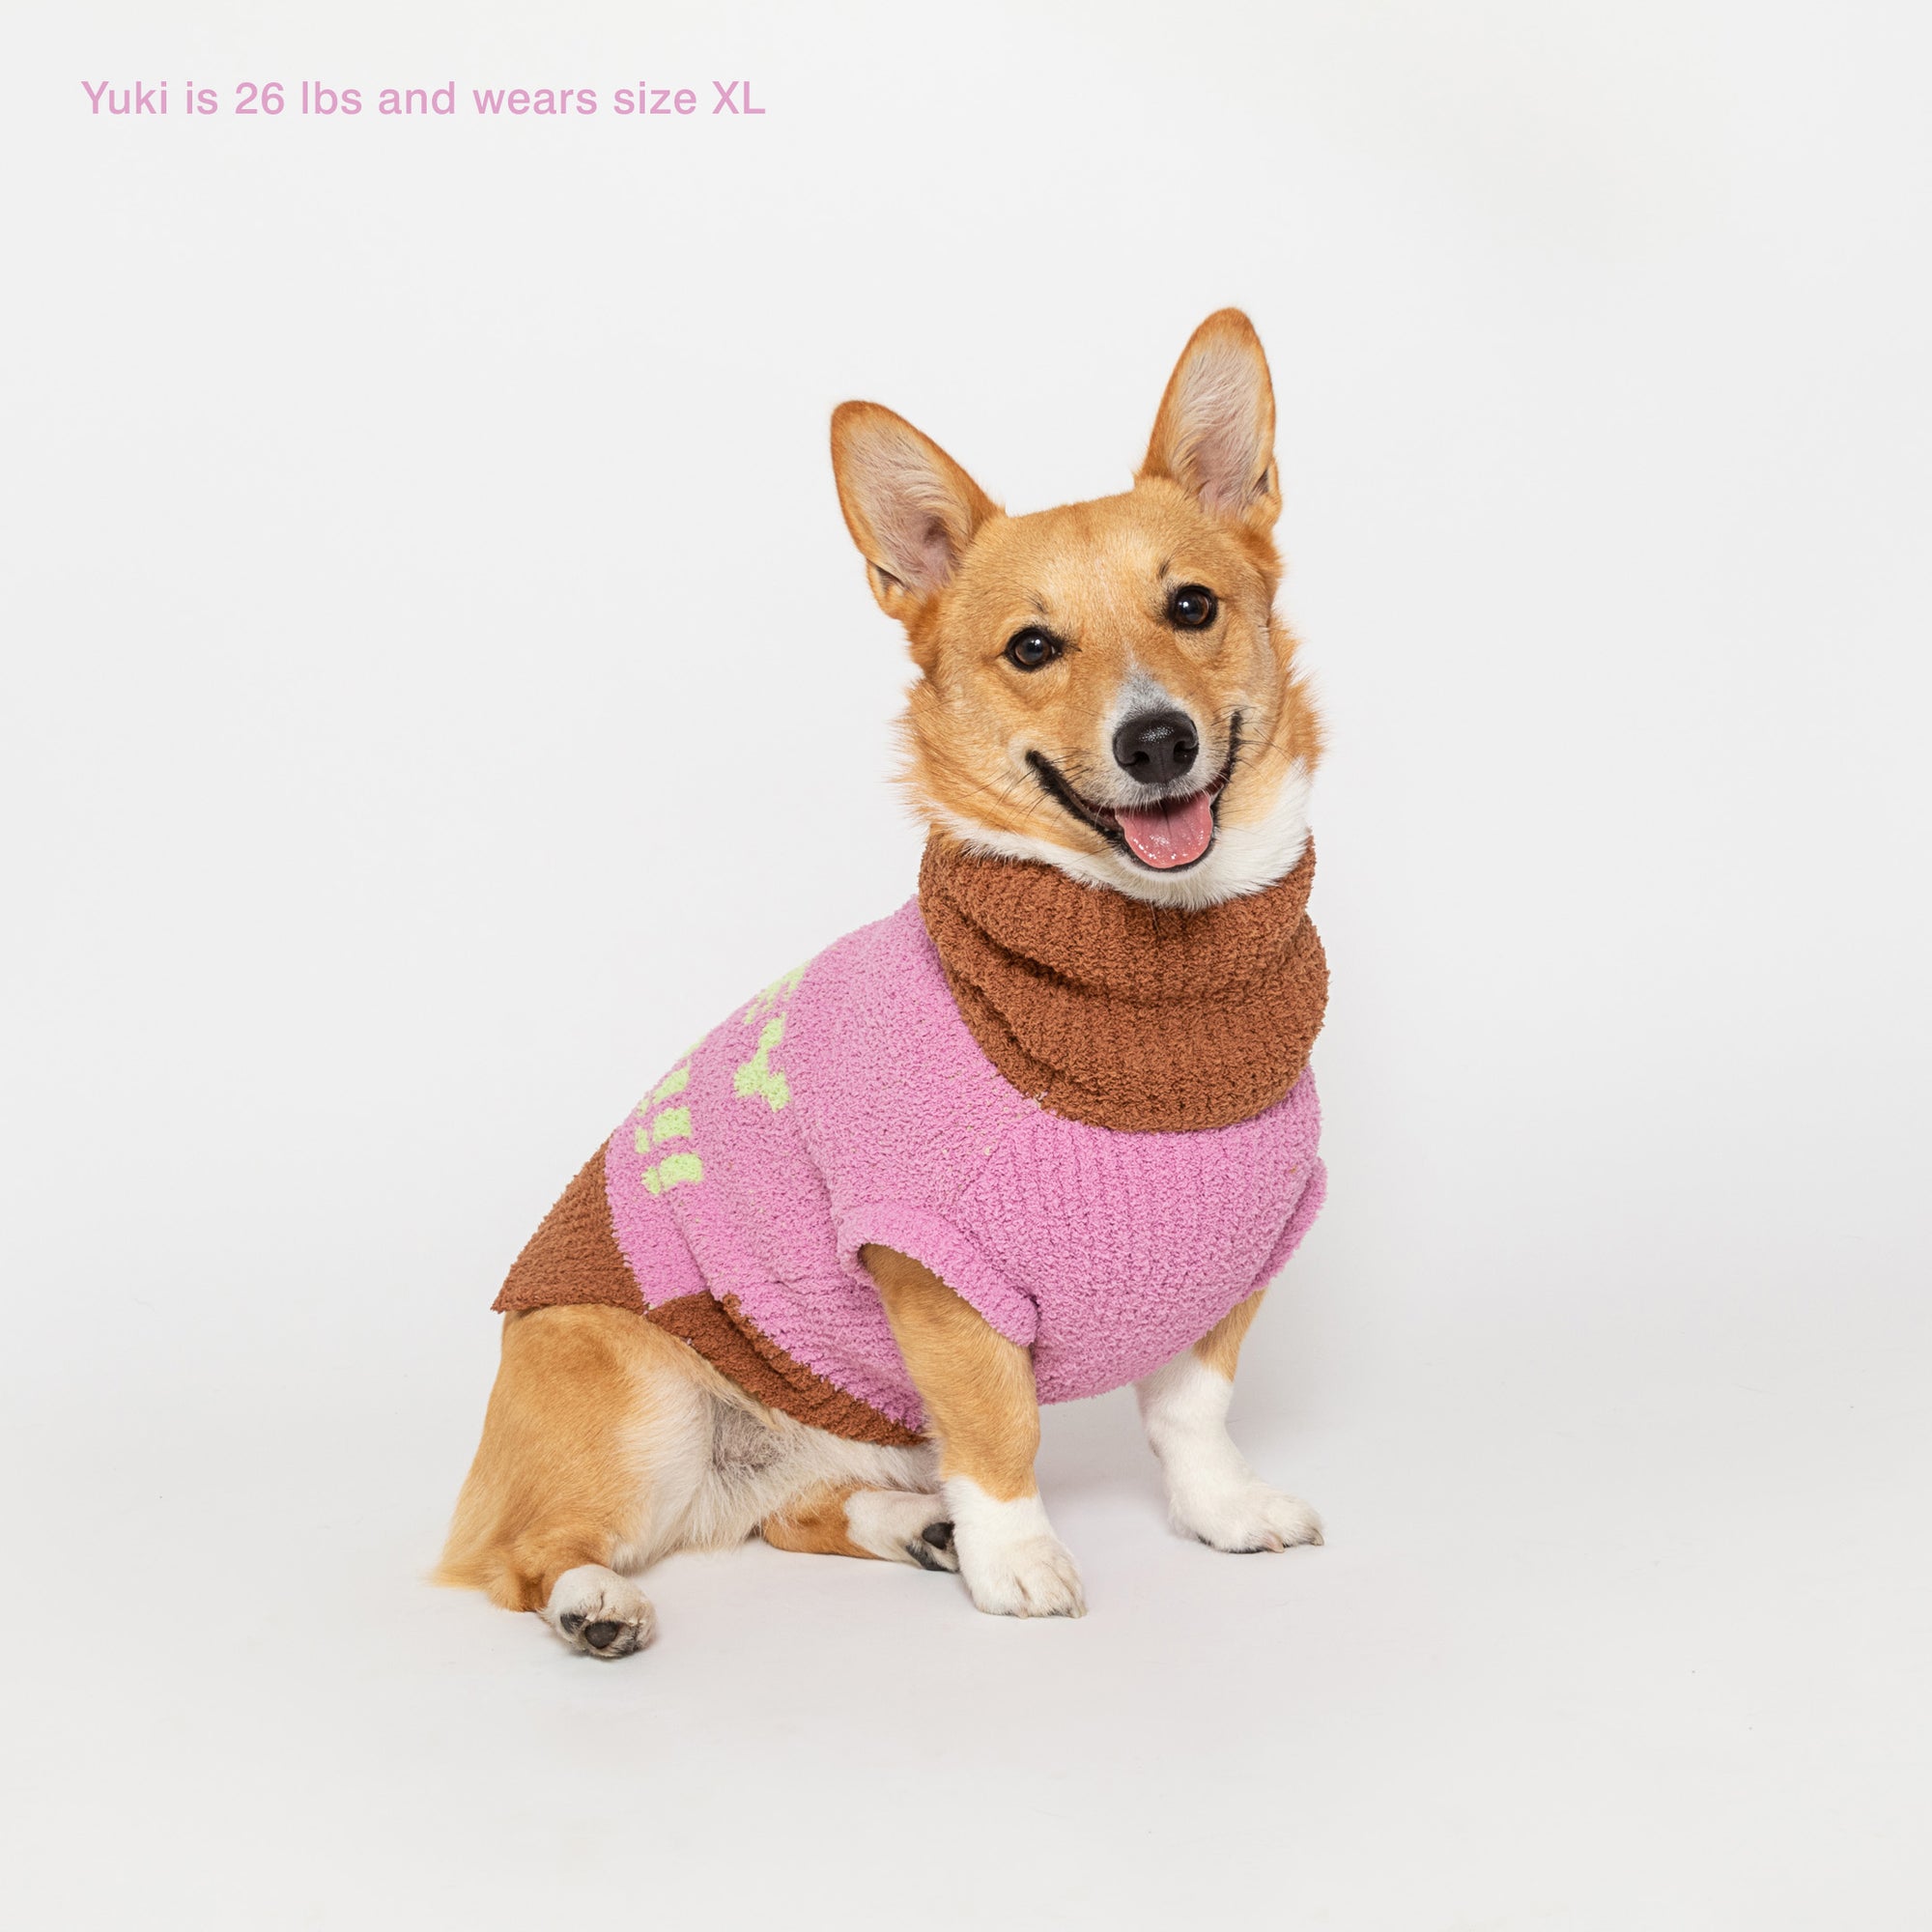 Corgi named Yuki, 26 lbs, dressed in an XL pink "The Furryfolks" Hey sweater, smiles at the camera, white background.